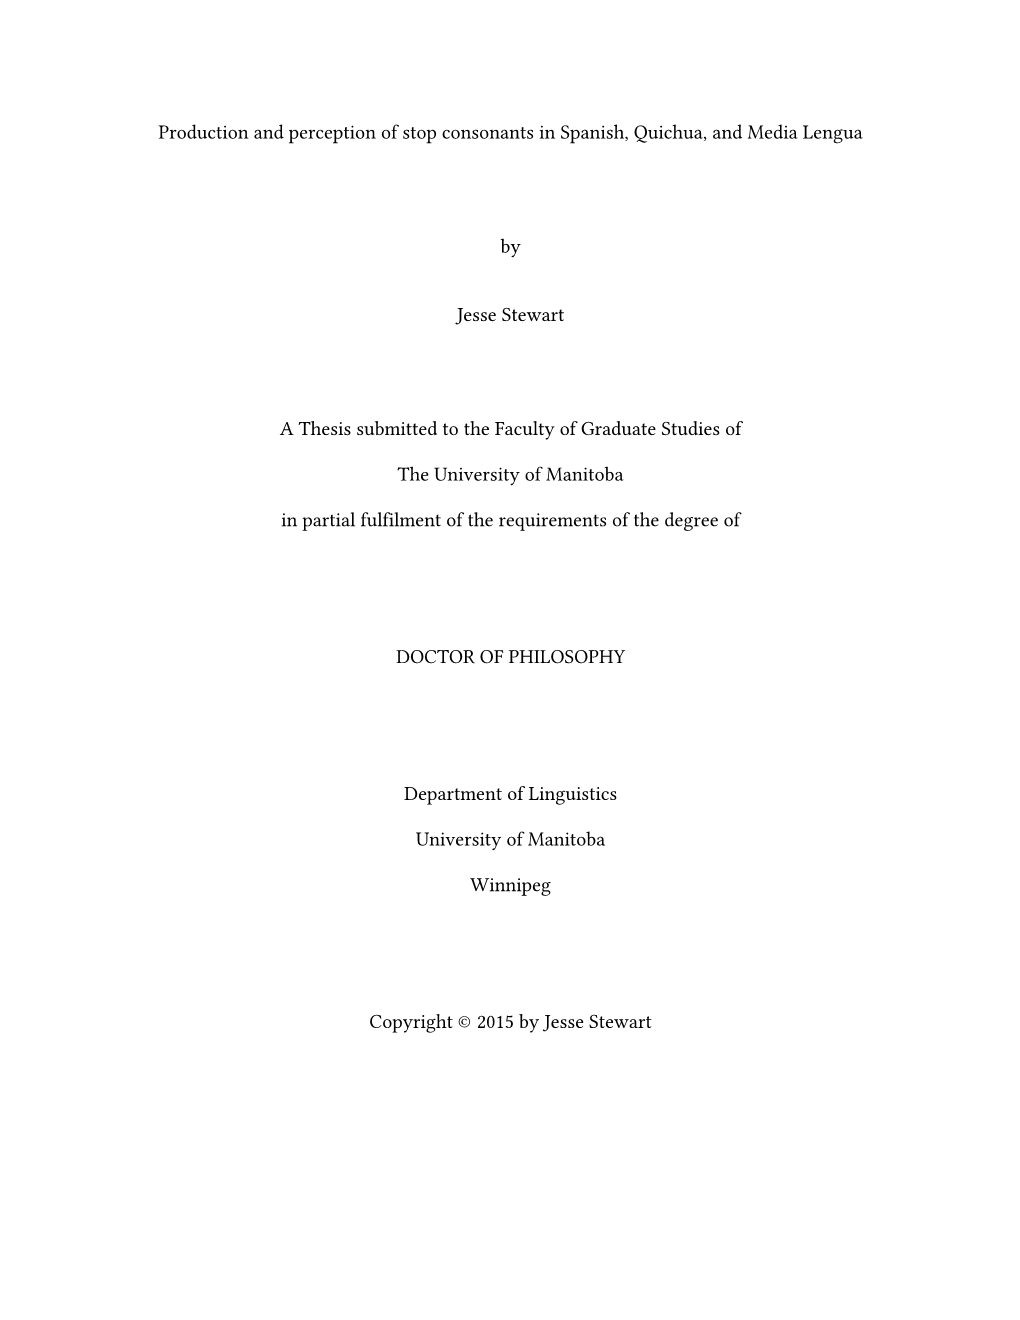 Production and Perception of Stop Consonants in Spanish, Quichua, and Media Lengua by Jesse Stewart a Thesis Submitted to the F